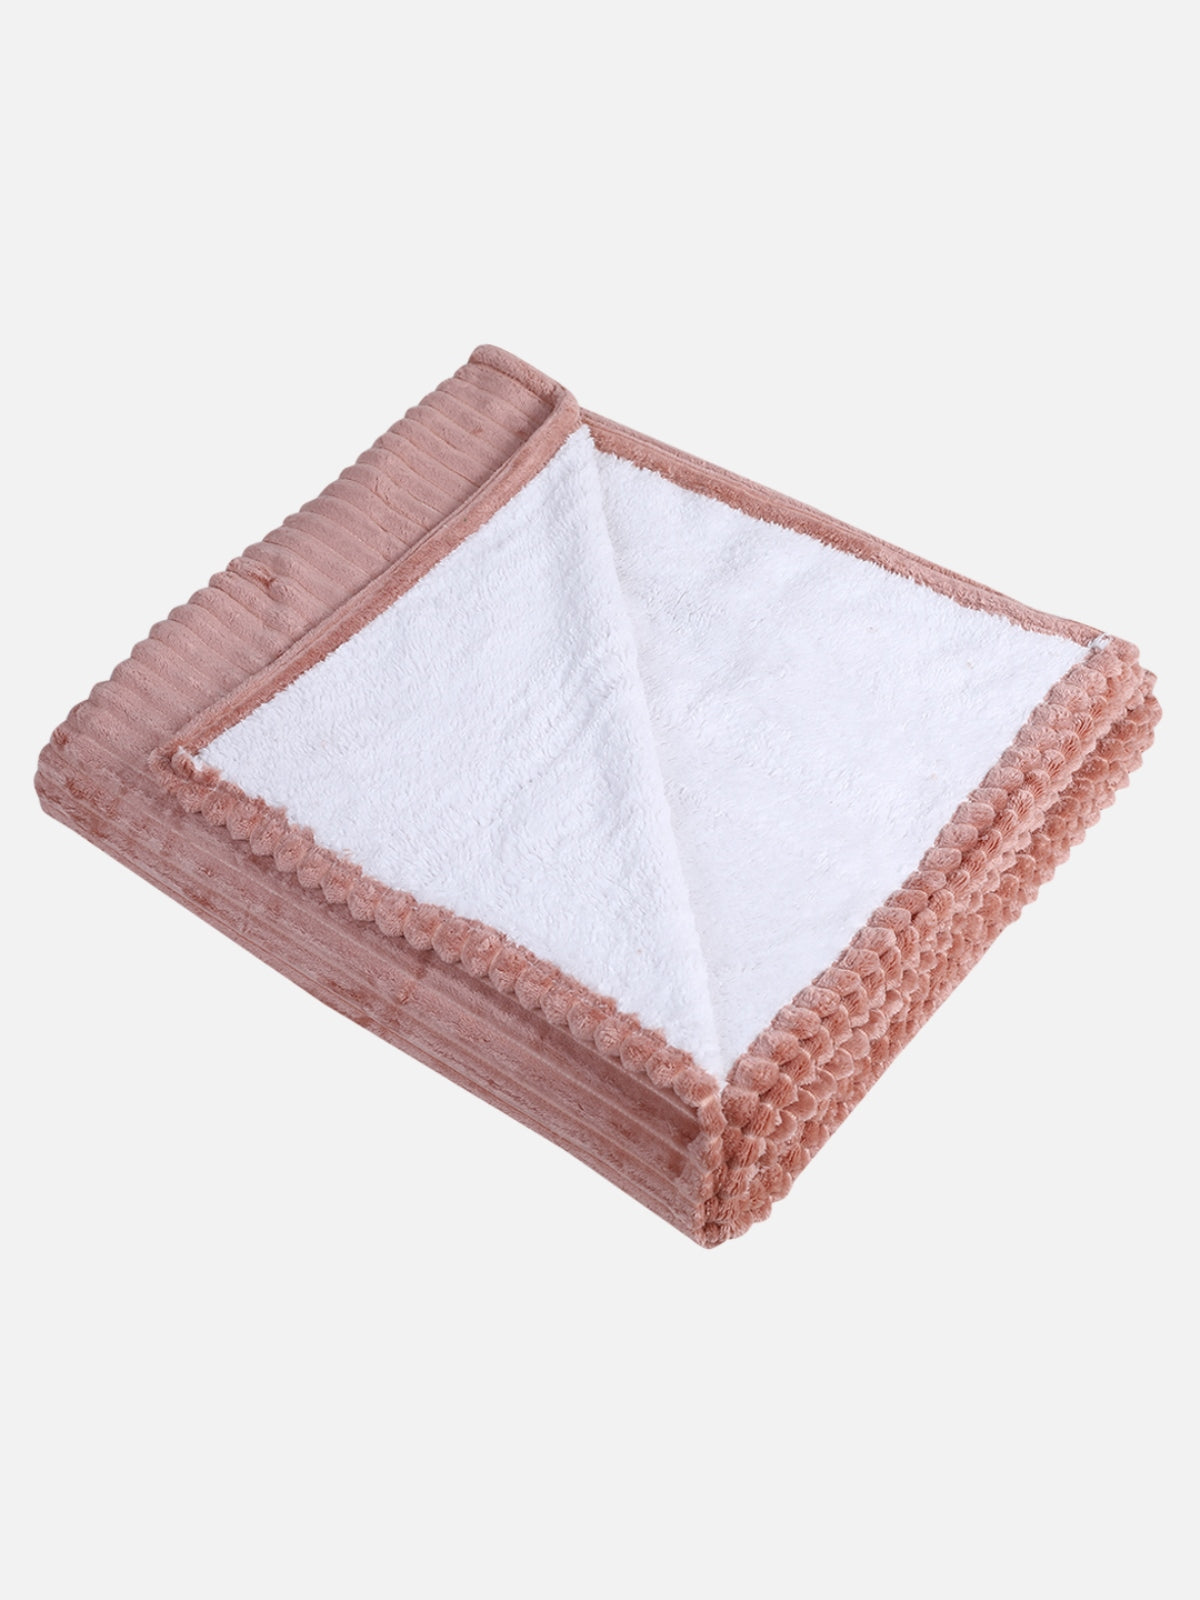 Peach 500 GSM Double Bed Stripes Patterned Sherpa Wool Blanket